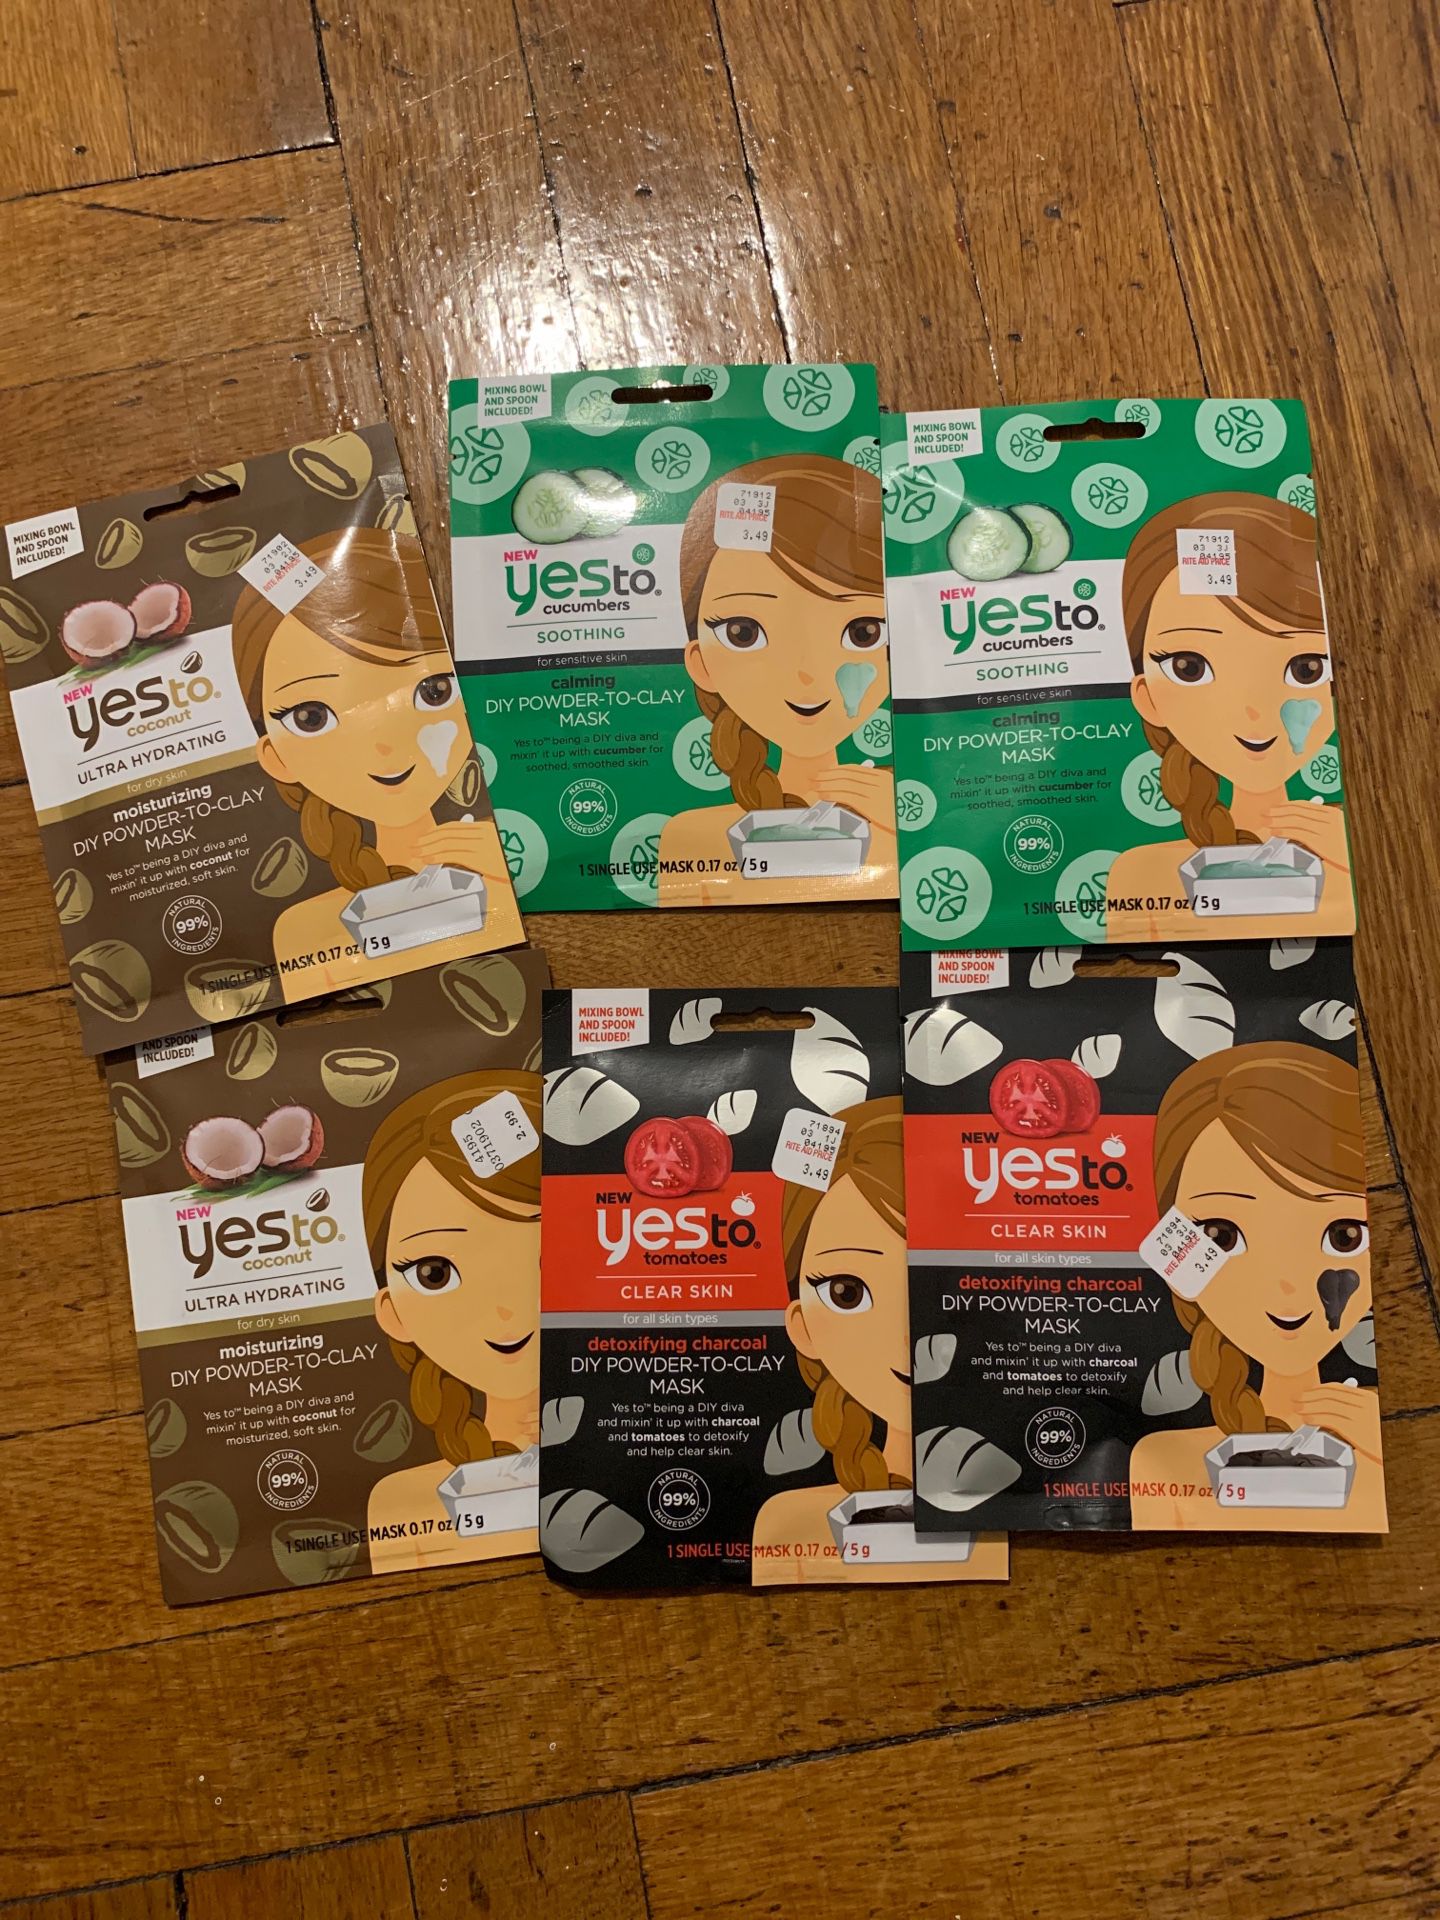 Yes to face mask $12